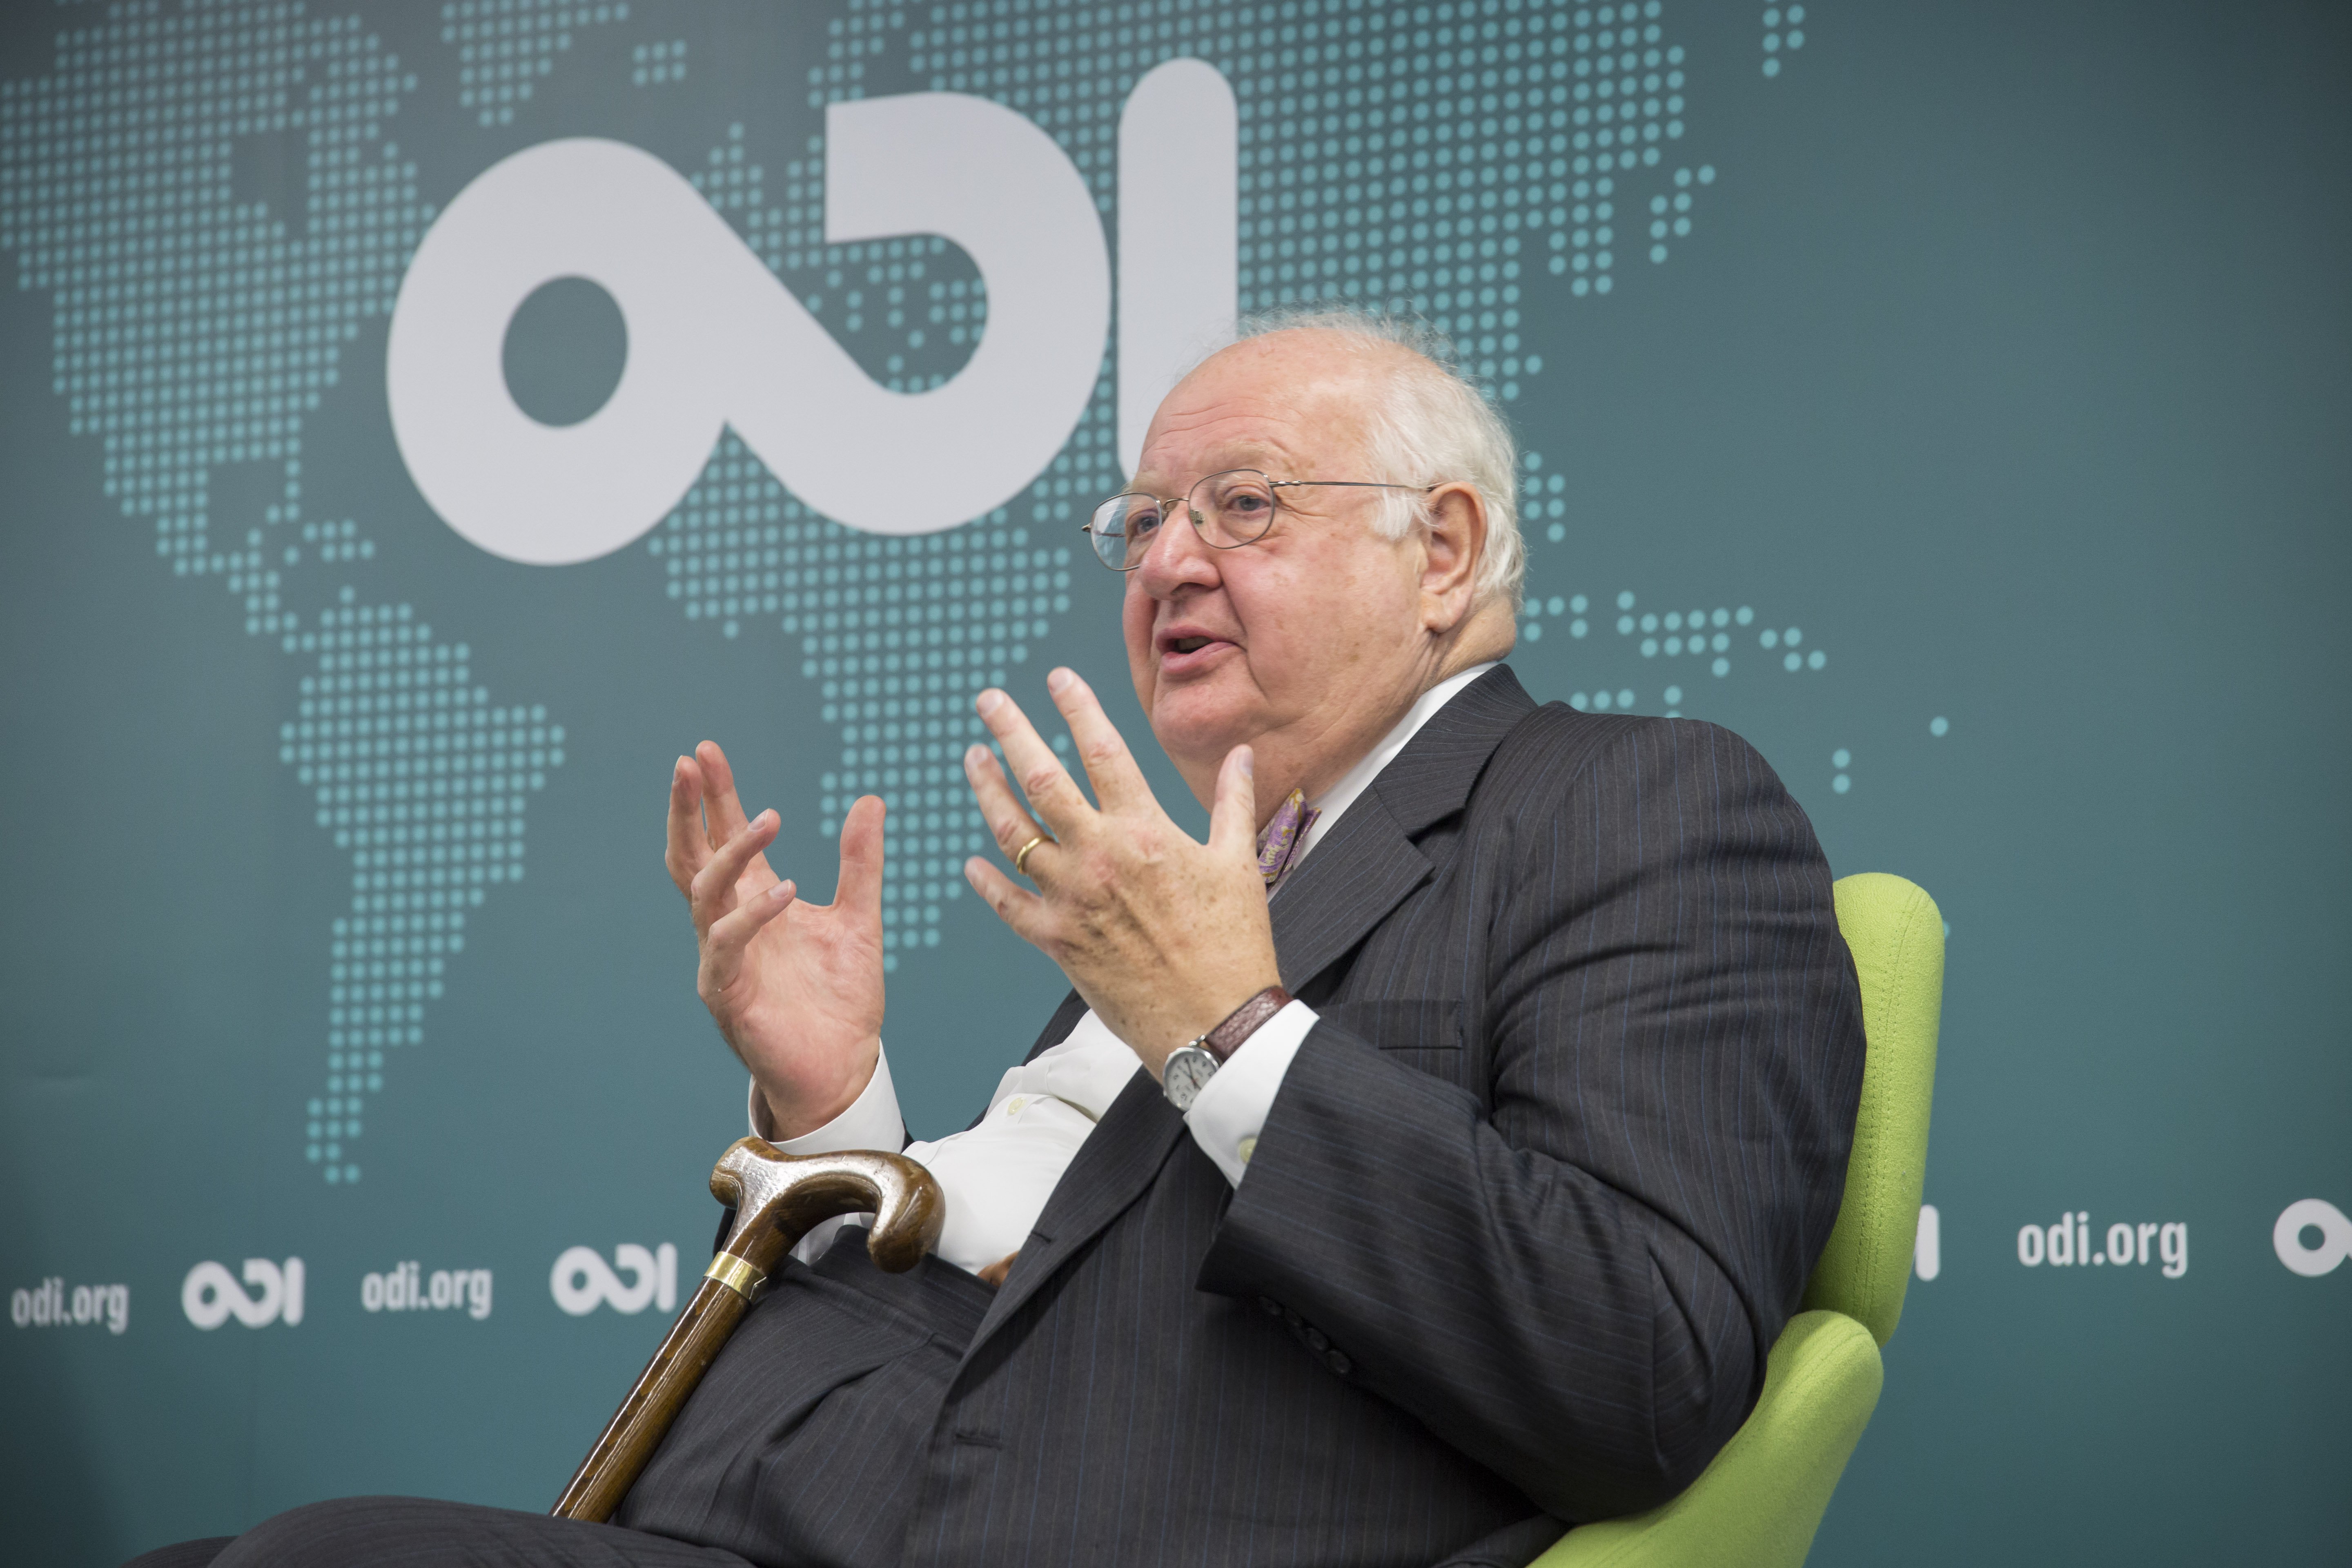 Winner of the 2015 Nobel prize in economics, Sir Angus Deaton, in conversation at ODI